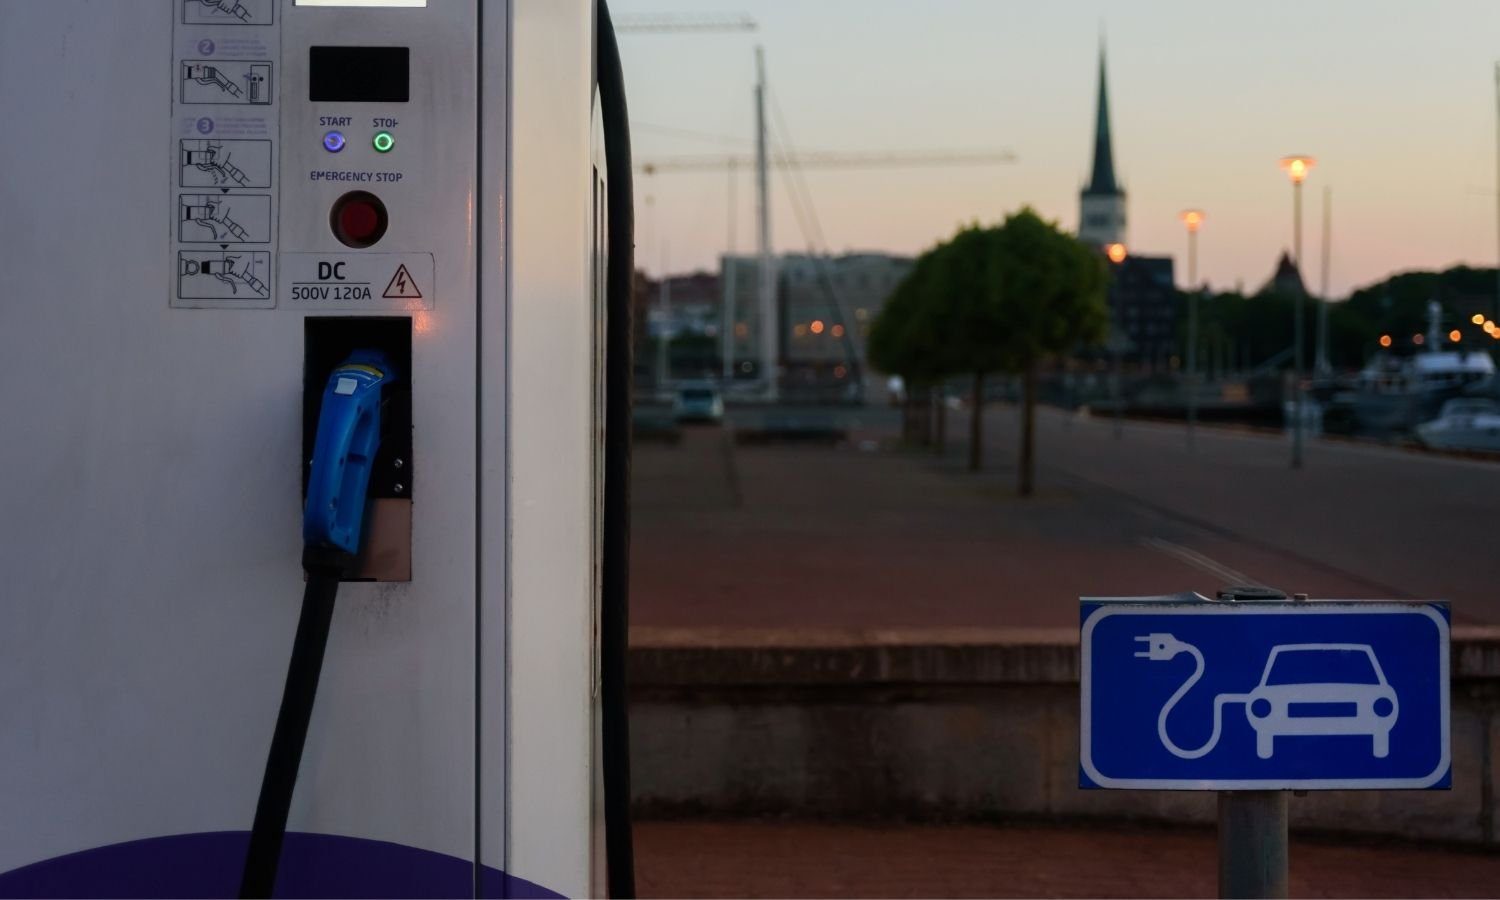 OTD in 2013: The first electric car charging network debuted in Estonia.